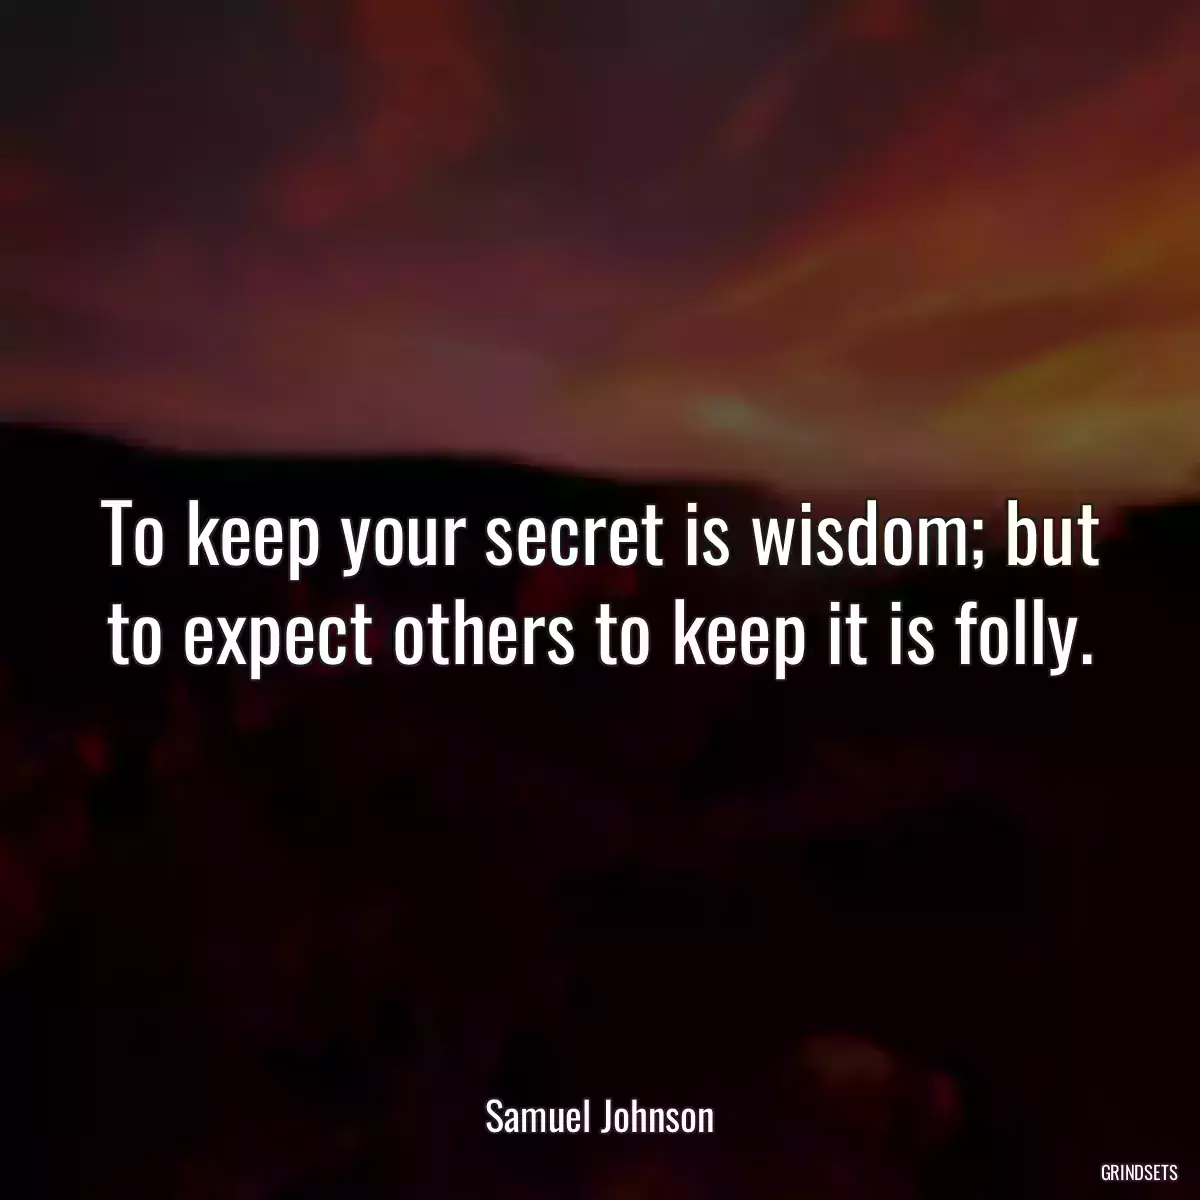 To keep your secret is wisdom; but to expect others to keep it is folly.